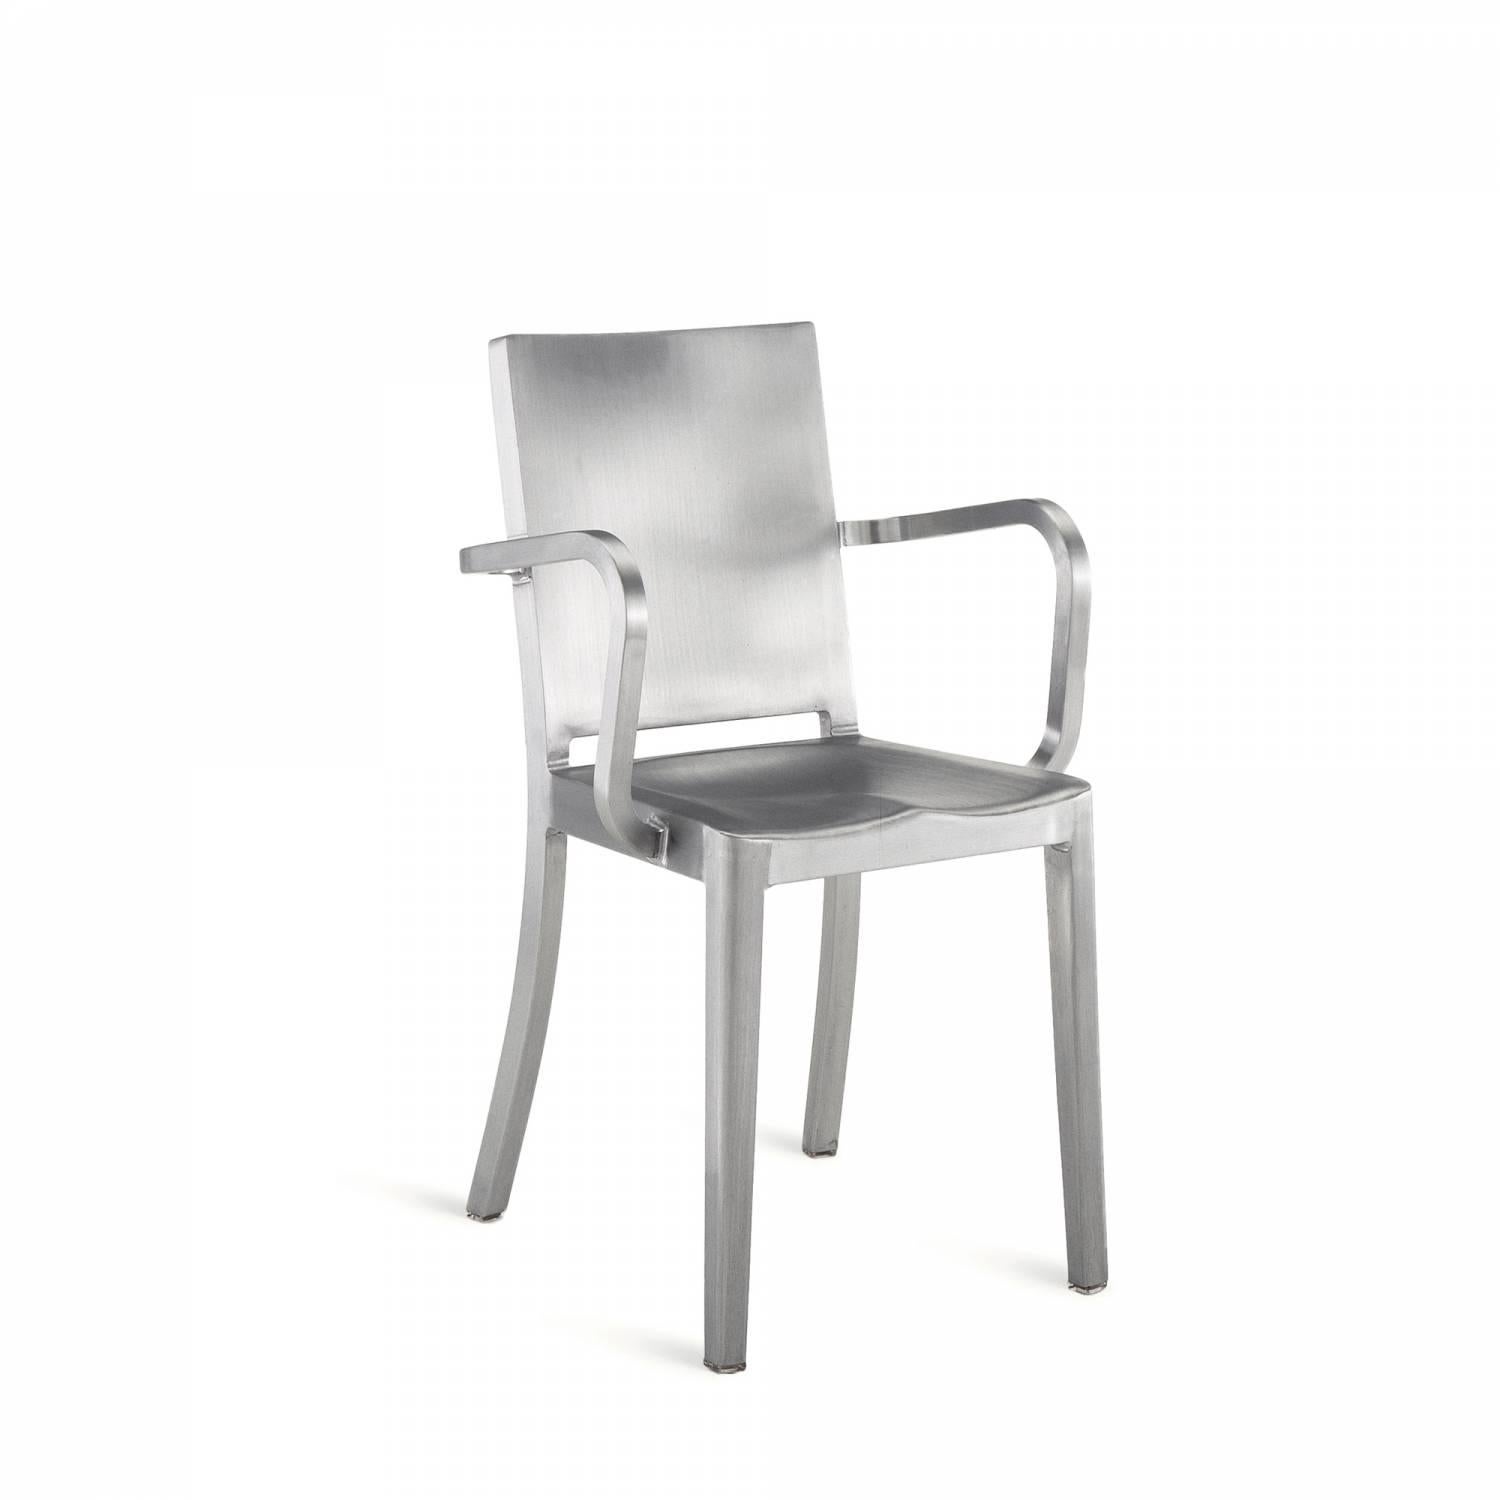 The Hudson, designed for the Hudson hotel in NYC, is Emeco and Starck’s first collaboration. Starck described the chair as “washing the details from the Navy Chair”. It takes an additional 8 hours to polish each Hudson chair. Hudson is in MoMa’s